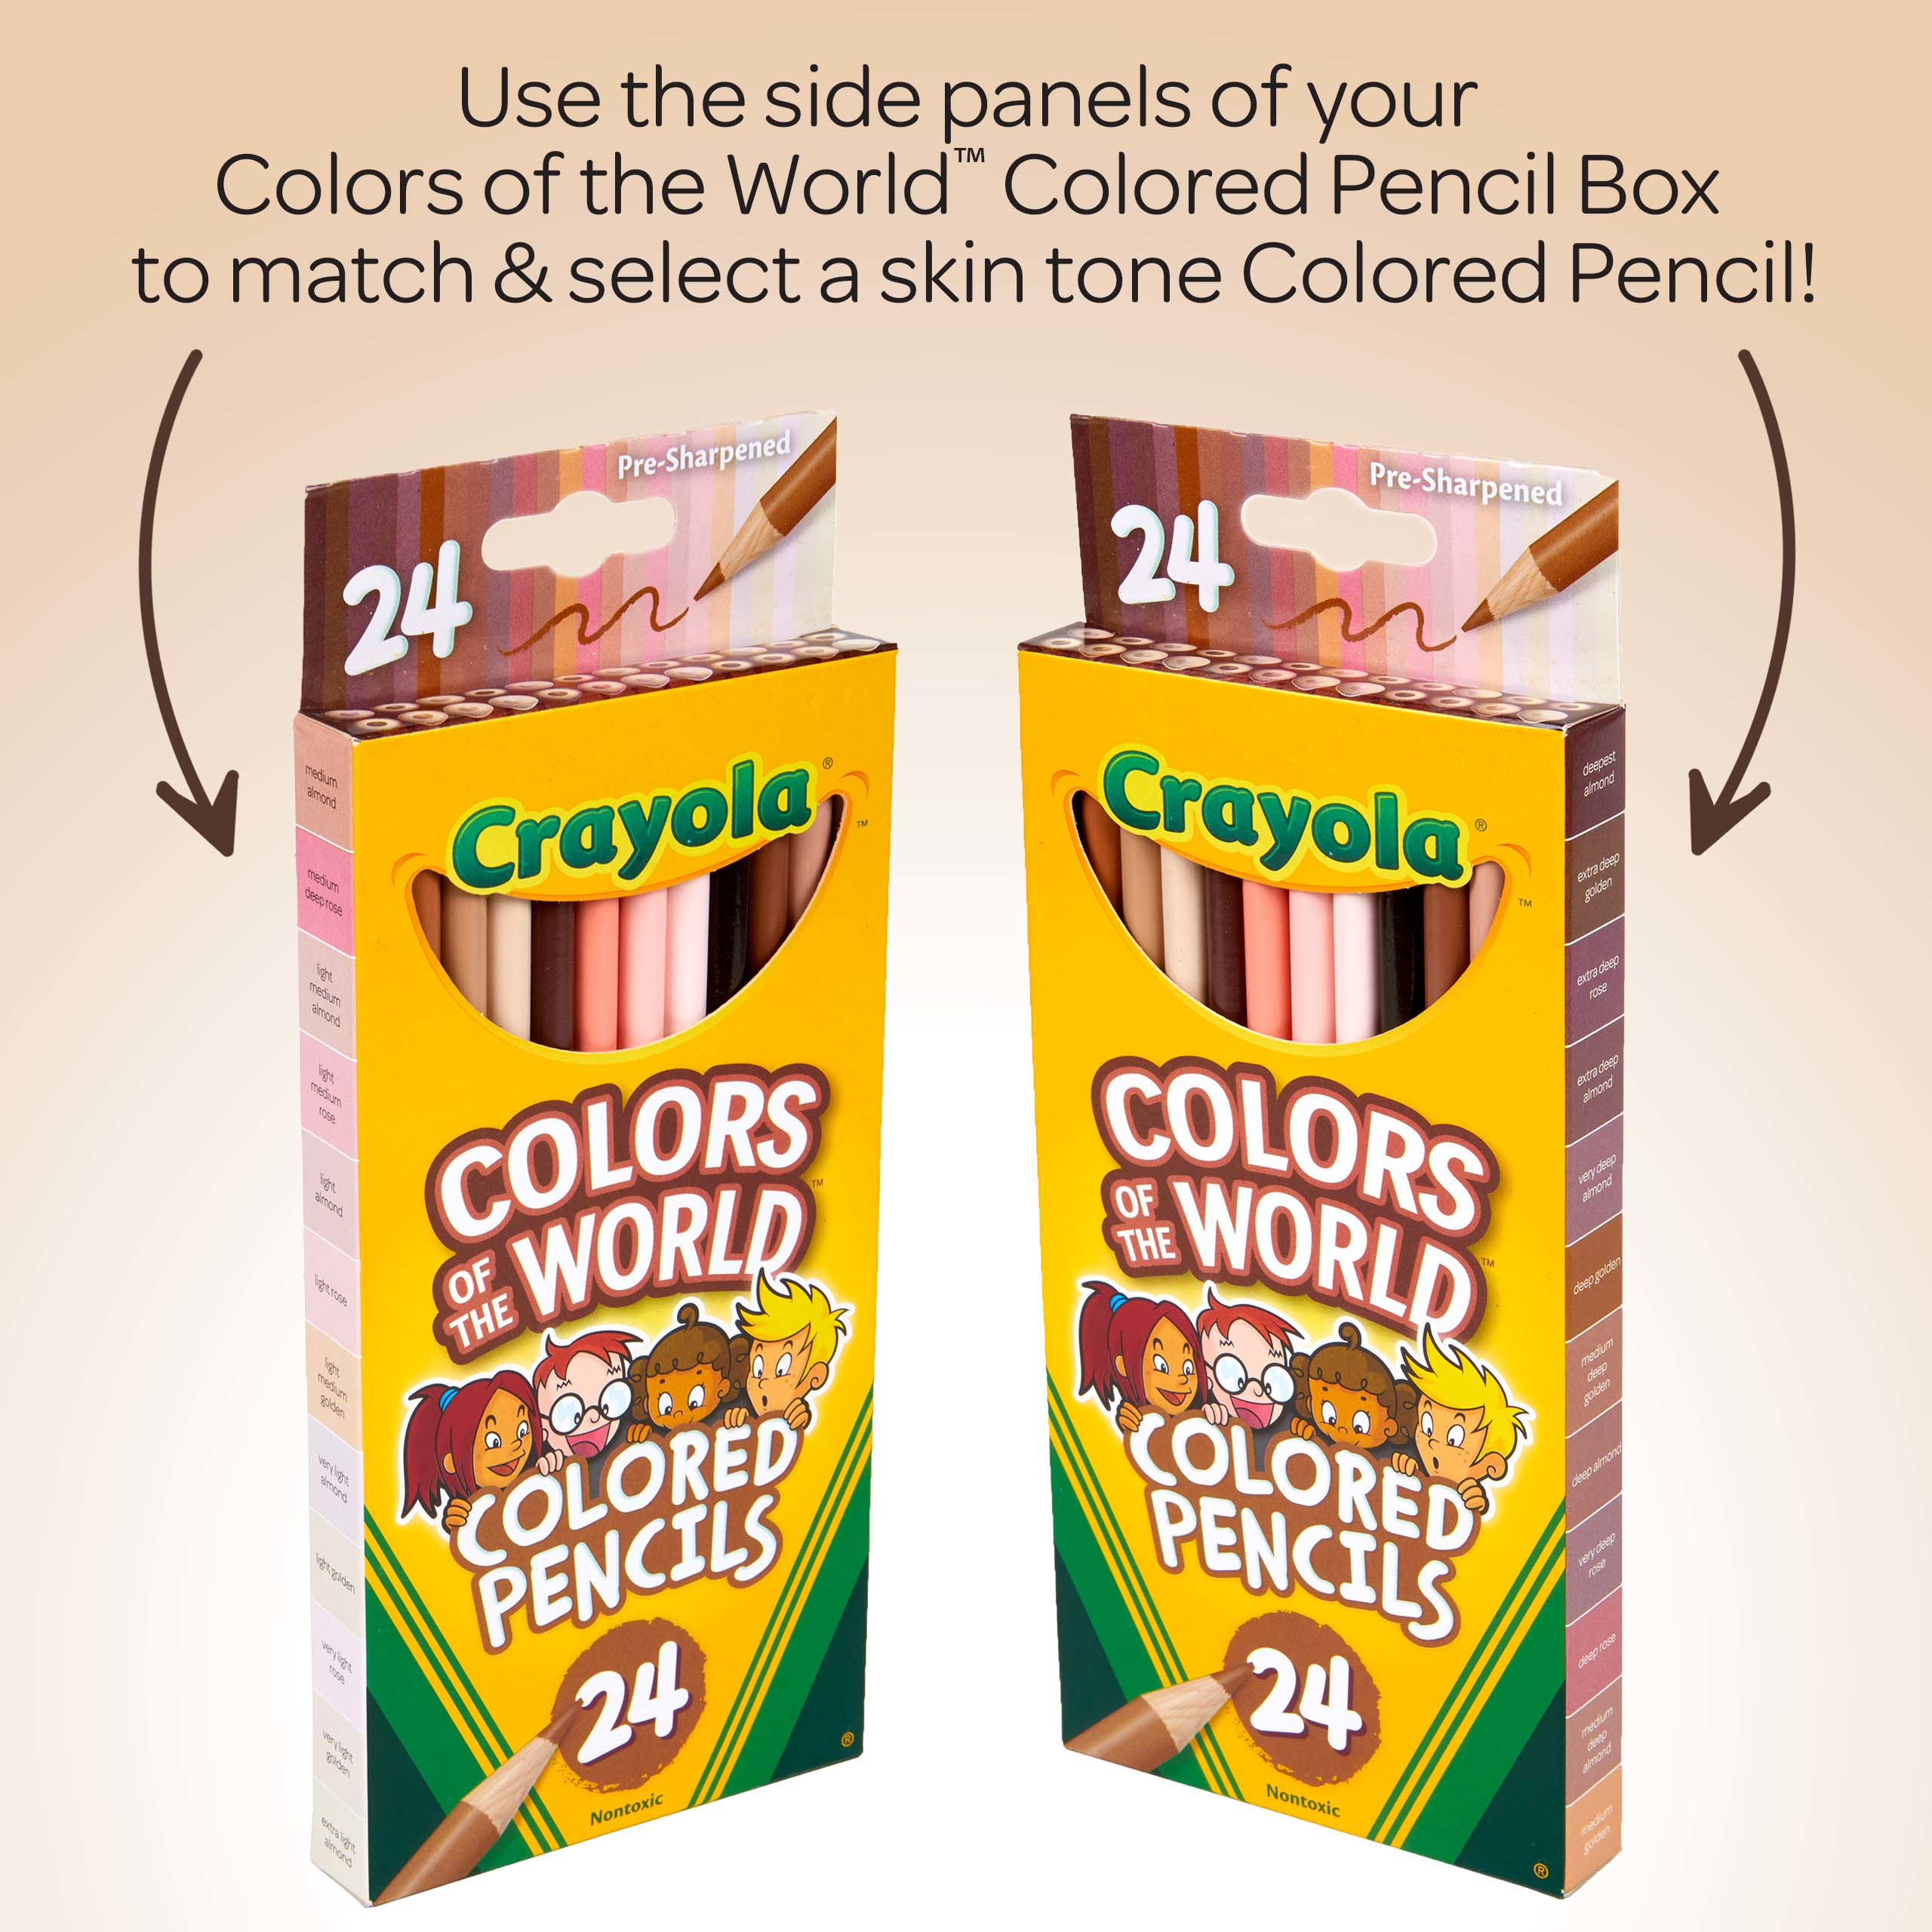 Crayola Colored Pencils 24 Pack, Colors of the World, Skin Tone Colored Pencils, 24 Colors, Child - image 4 of 8